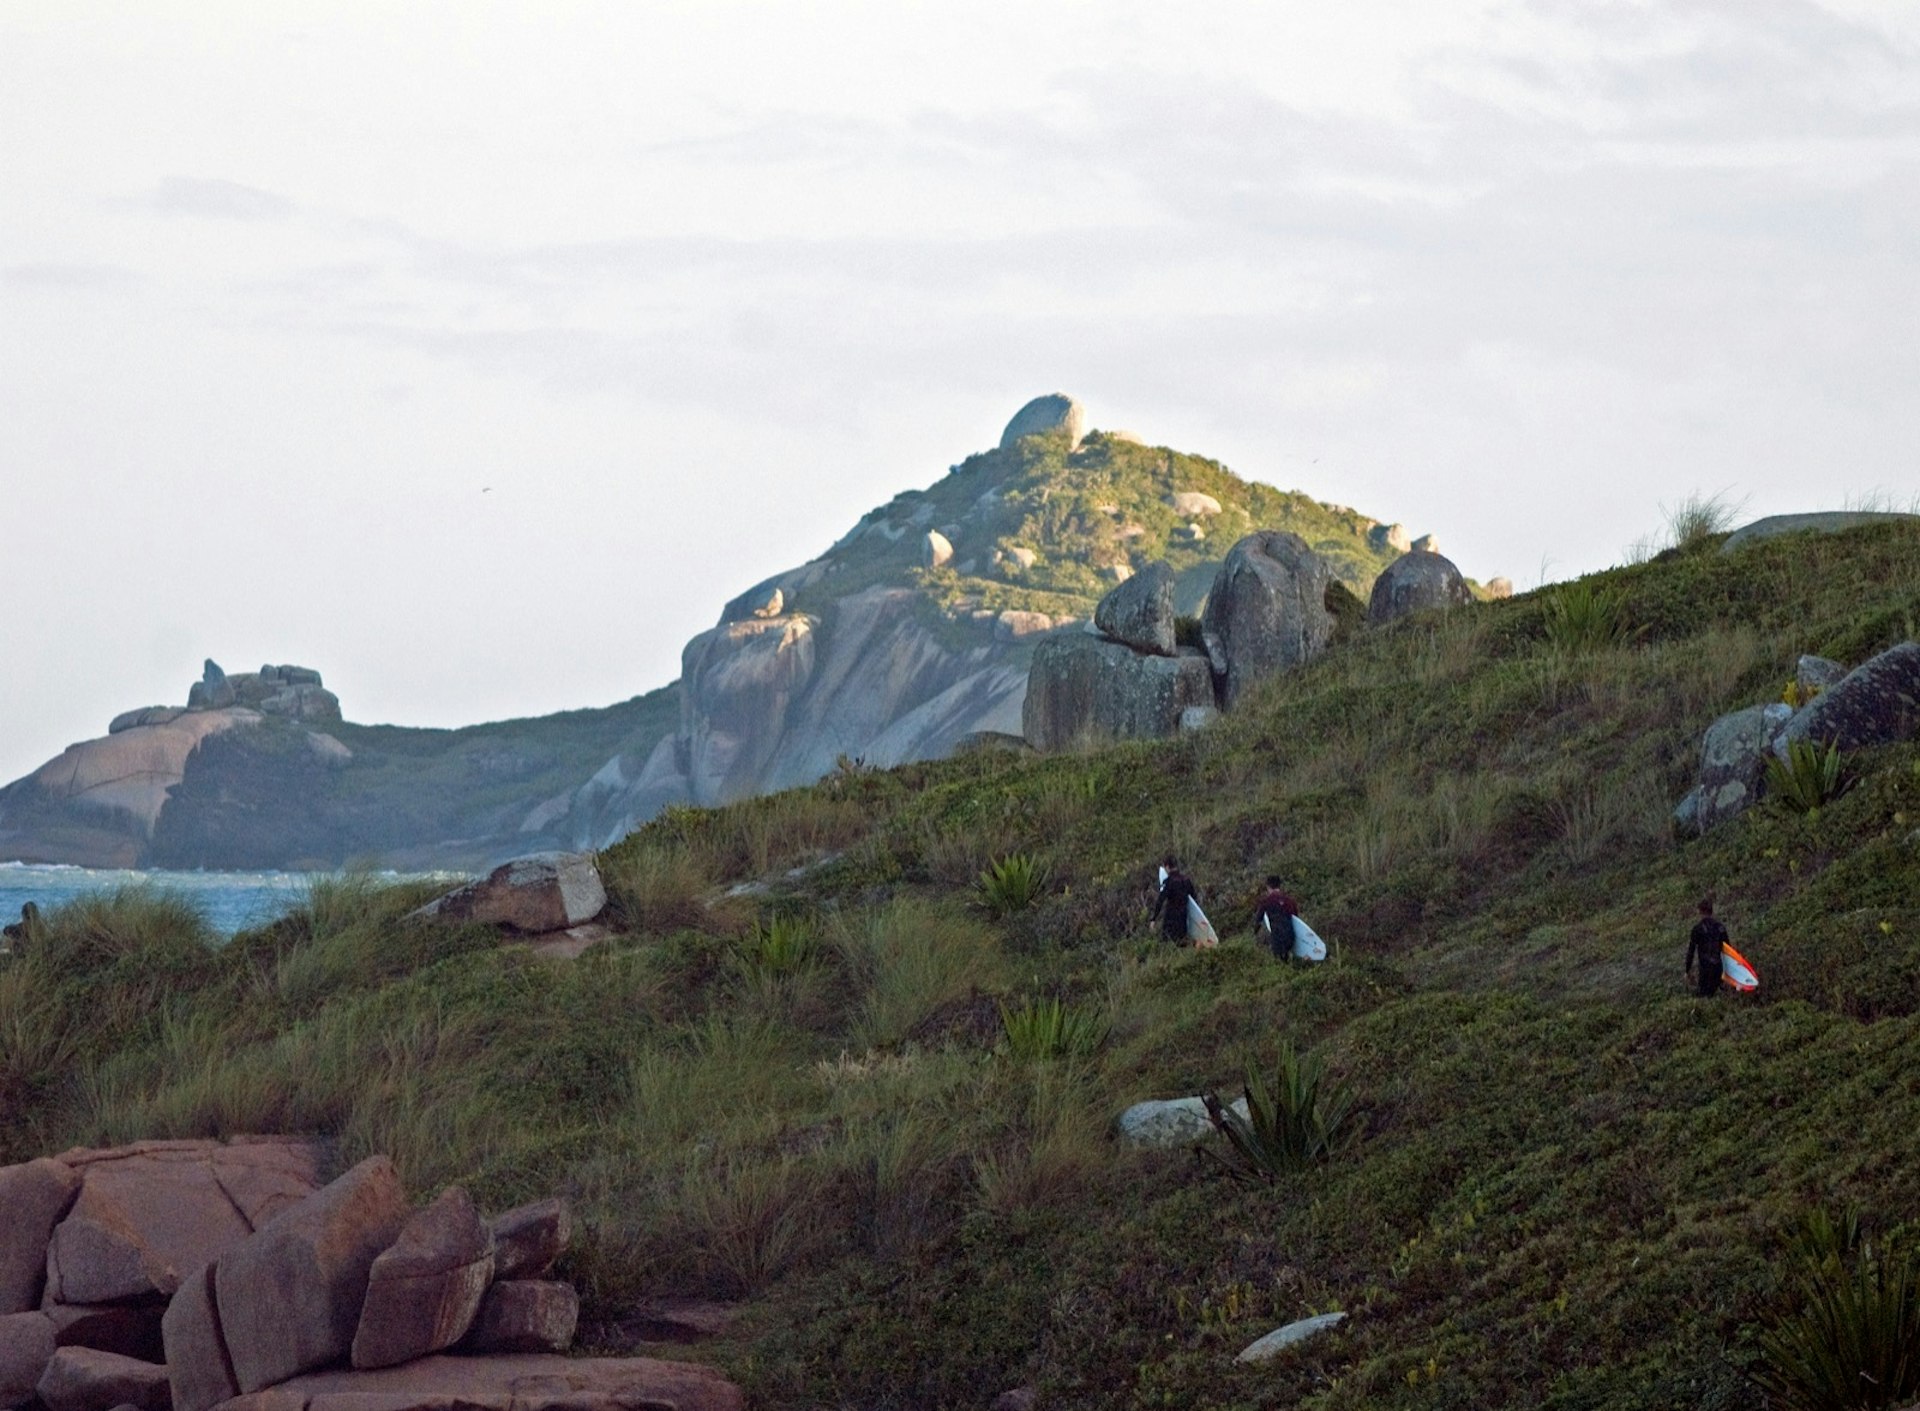 A line of three men carry surf boards up a rocky slope on their way to a spot to surf